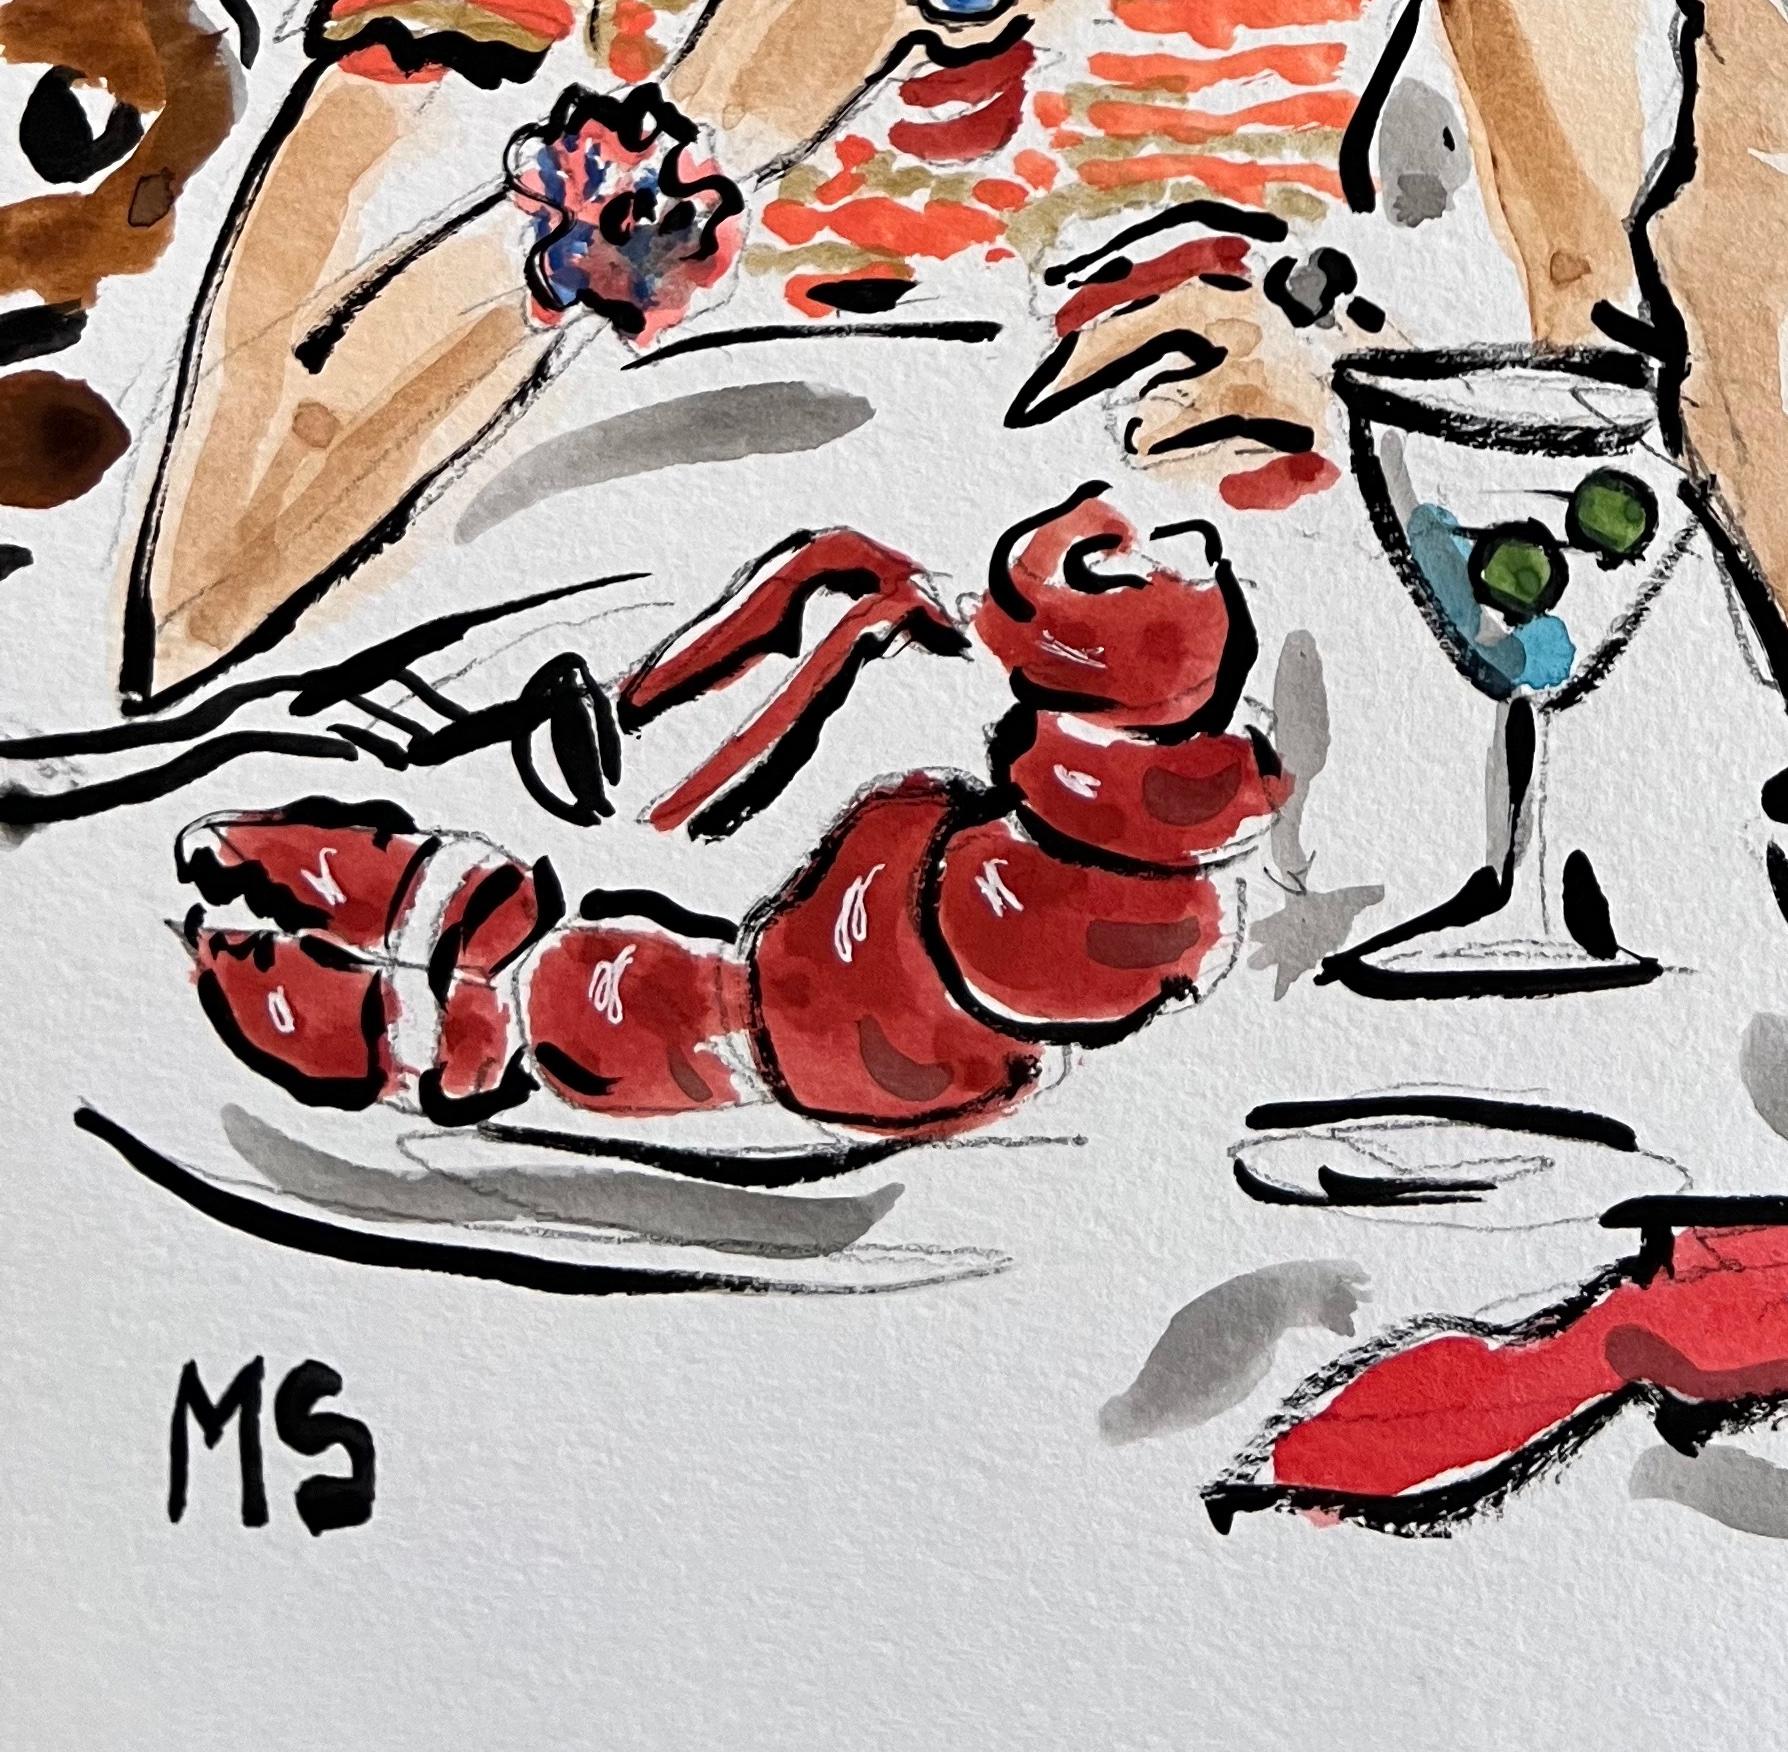 Lobster dinner at the Carlyle, Watercolor social scene New York City - Beige Figurative Art by Manuel Santelices